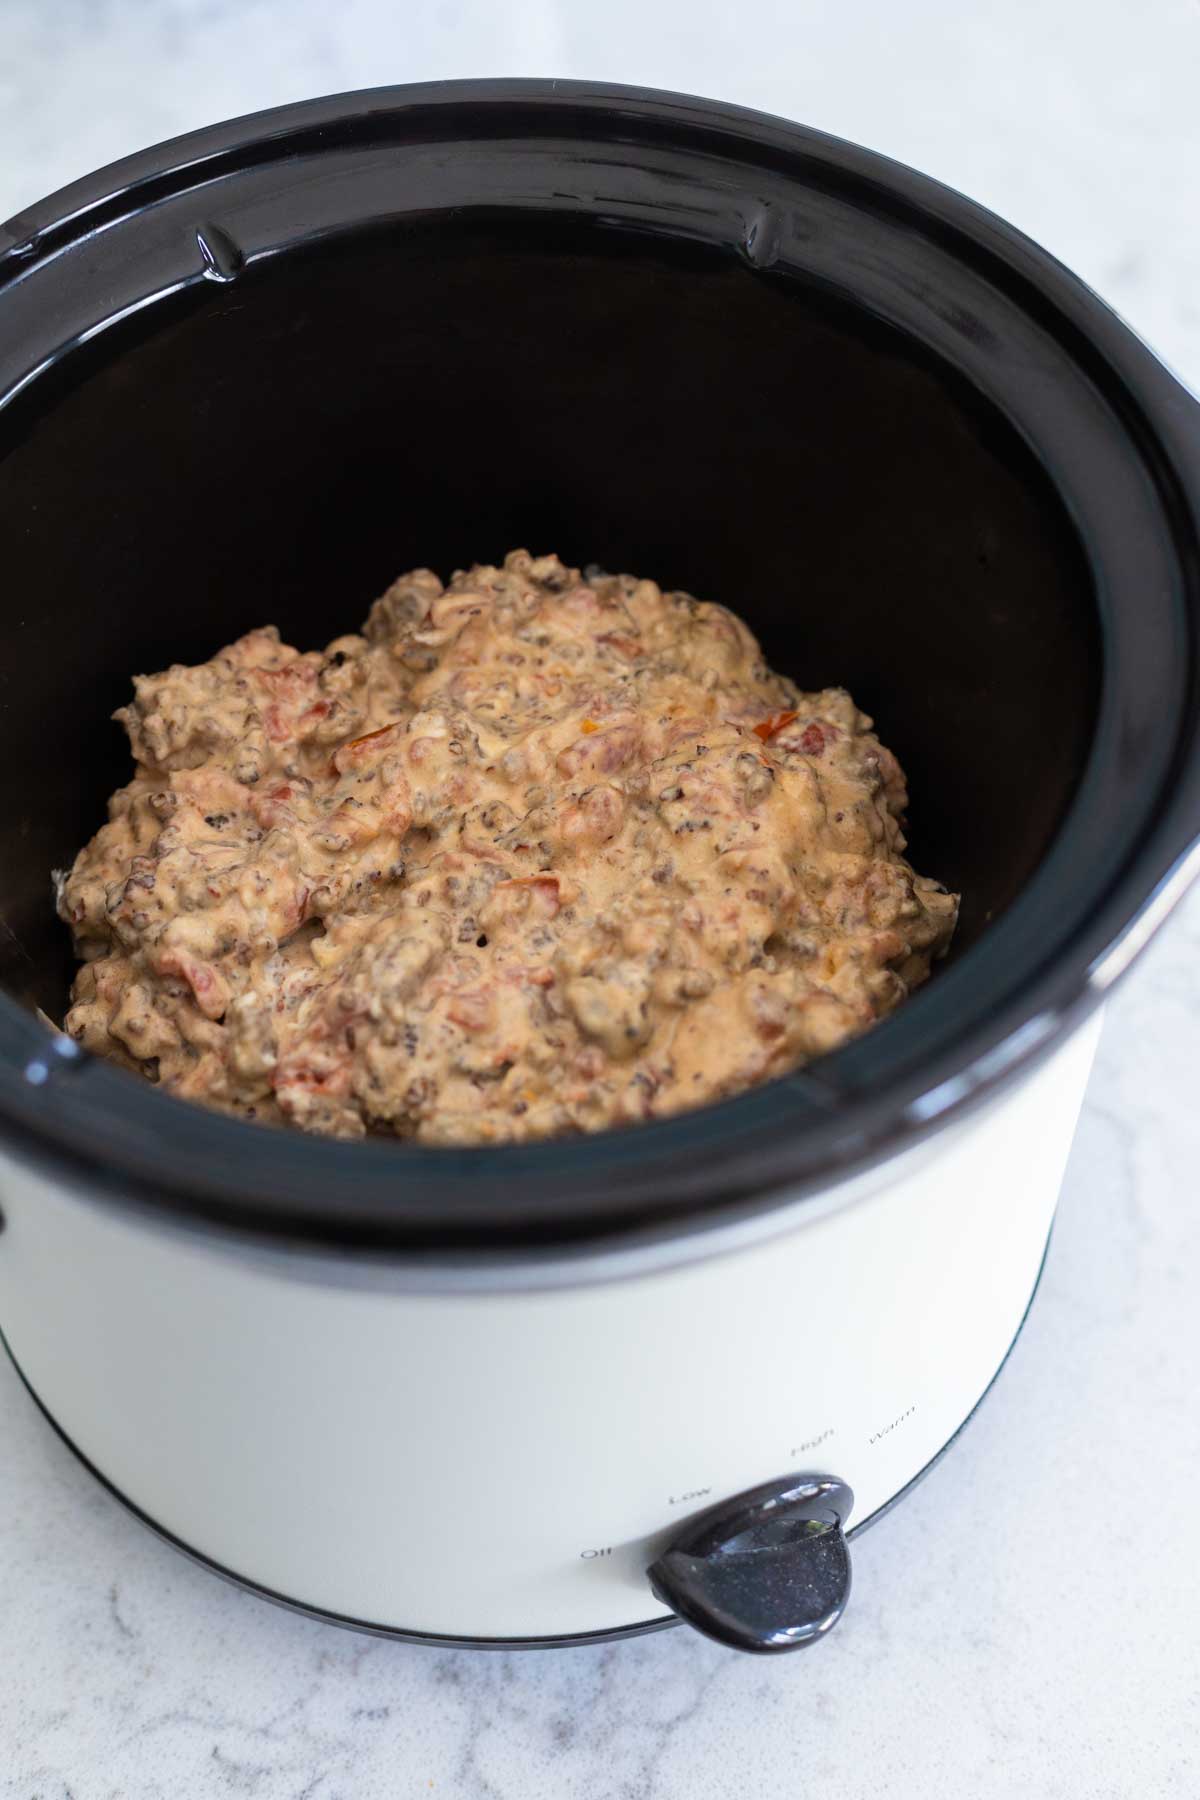 The slowcooker is filled with the sausage dip.